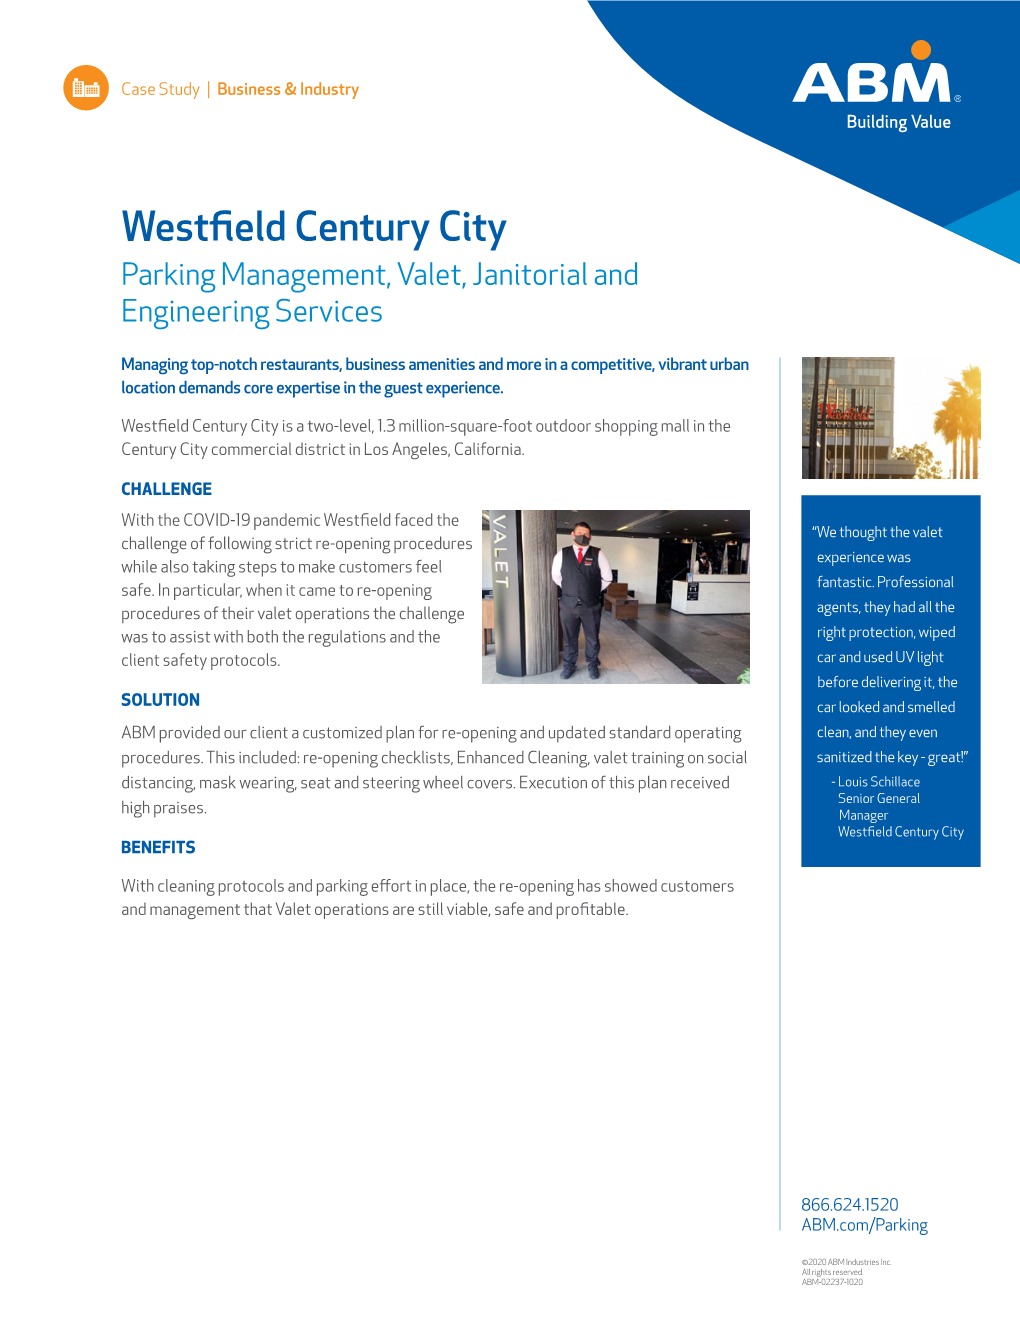 Westfield Century City Parking Management, Valet, Janitorial and Engineering Services